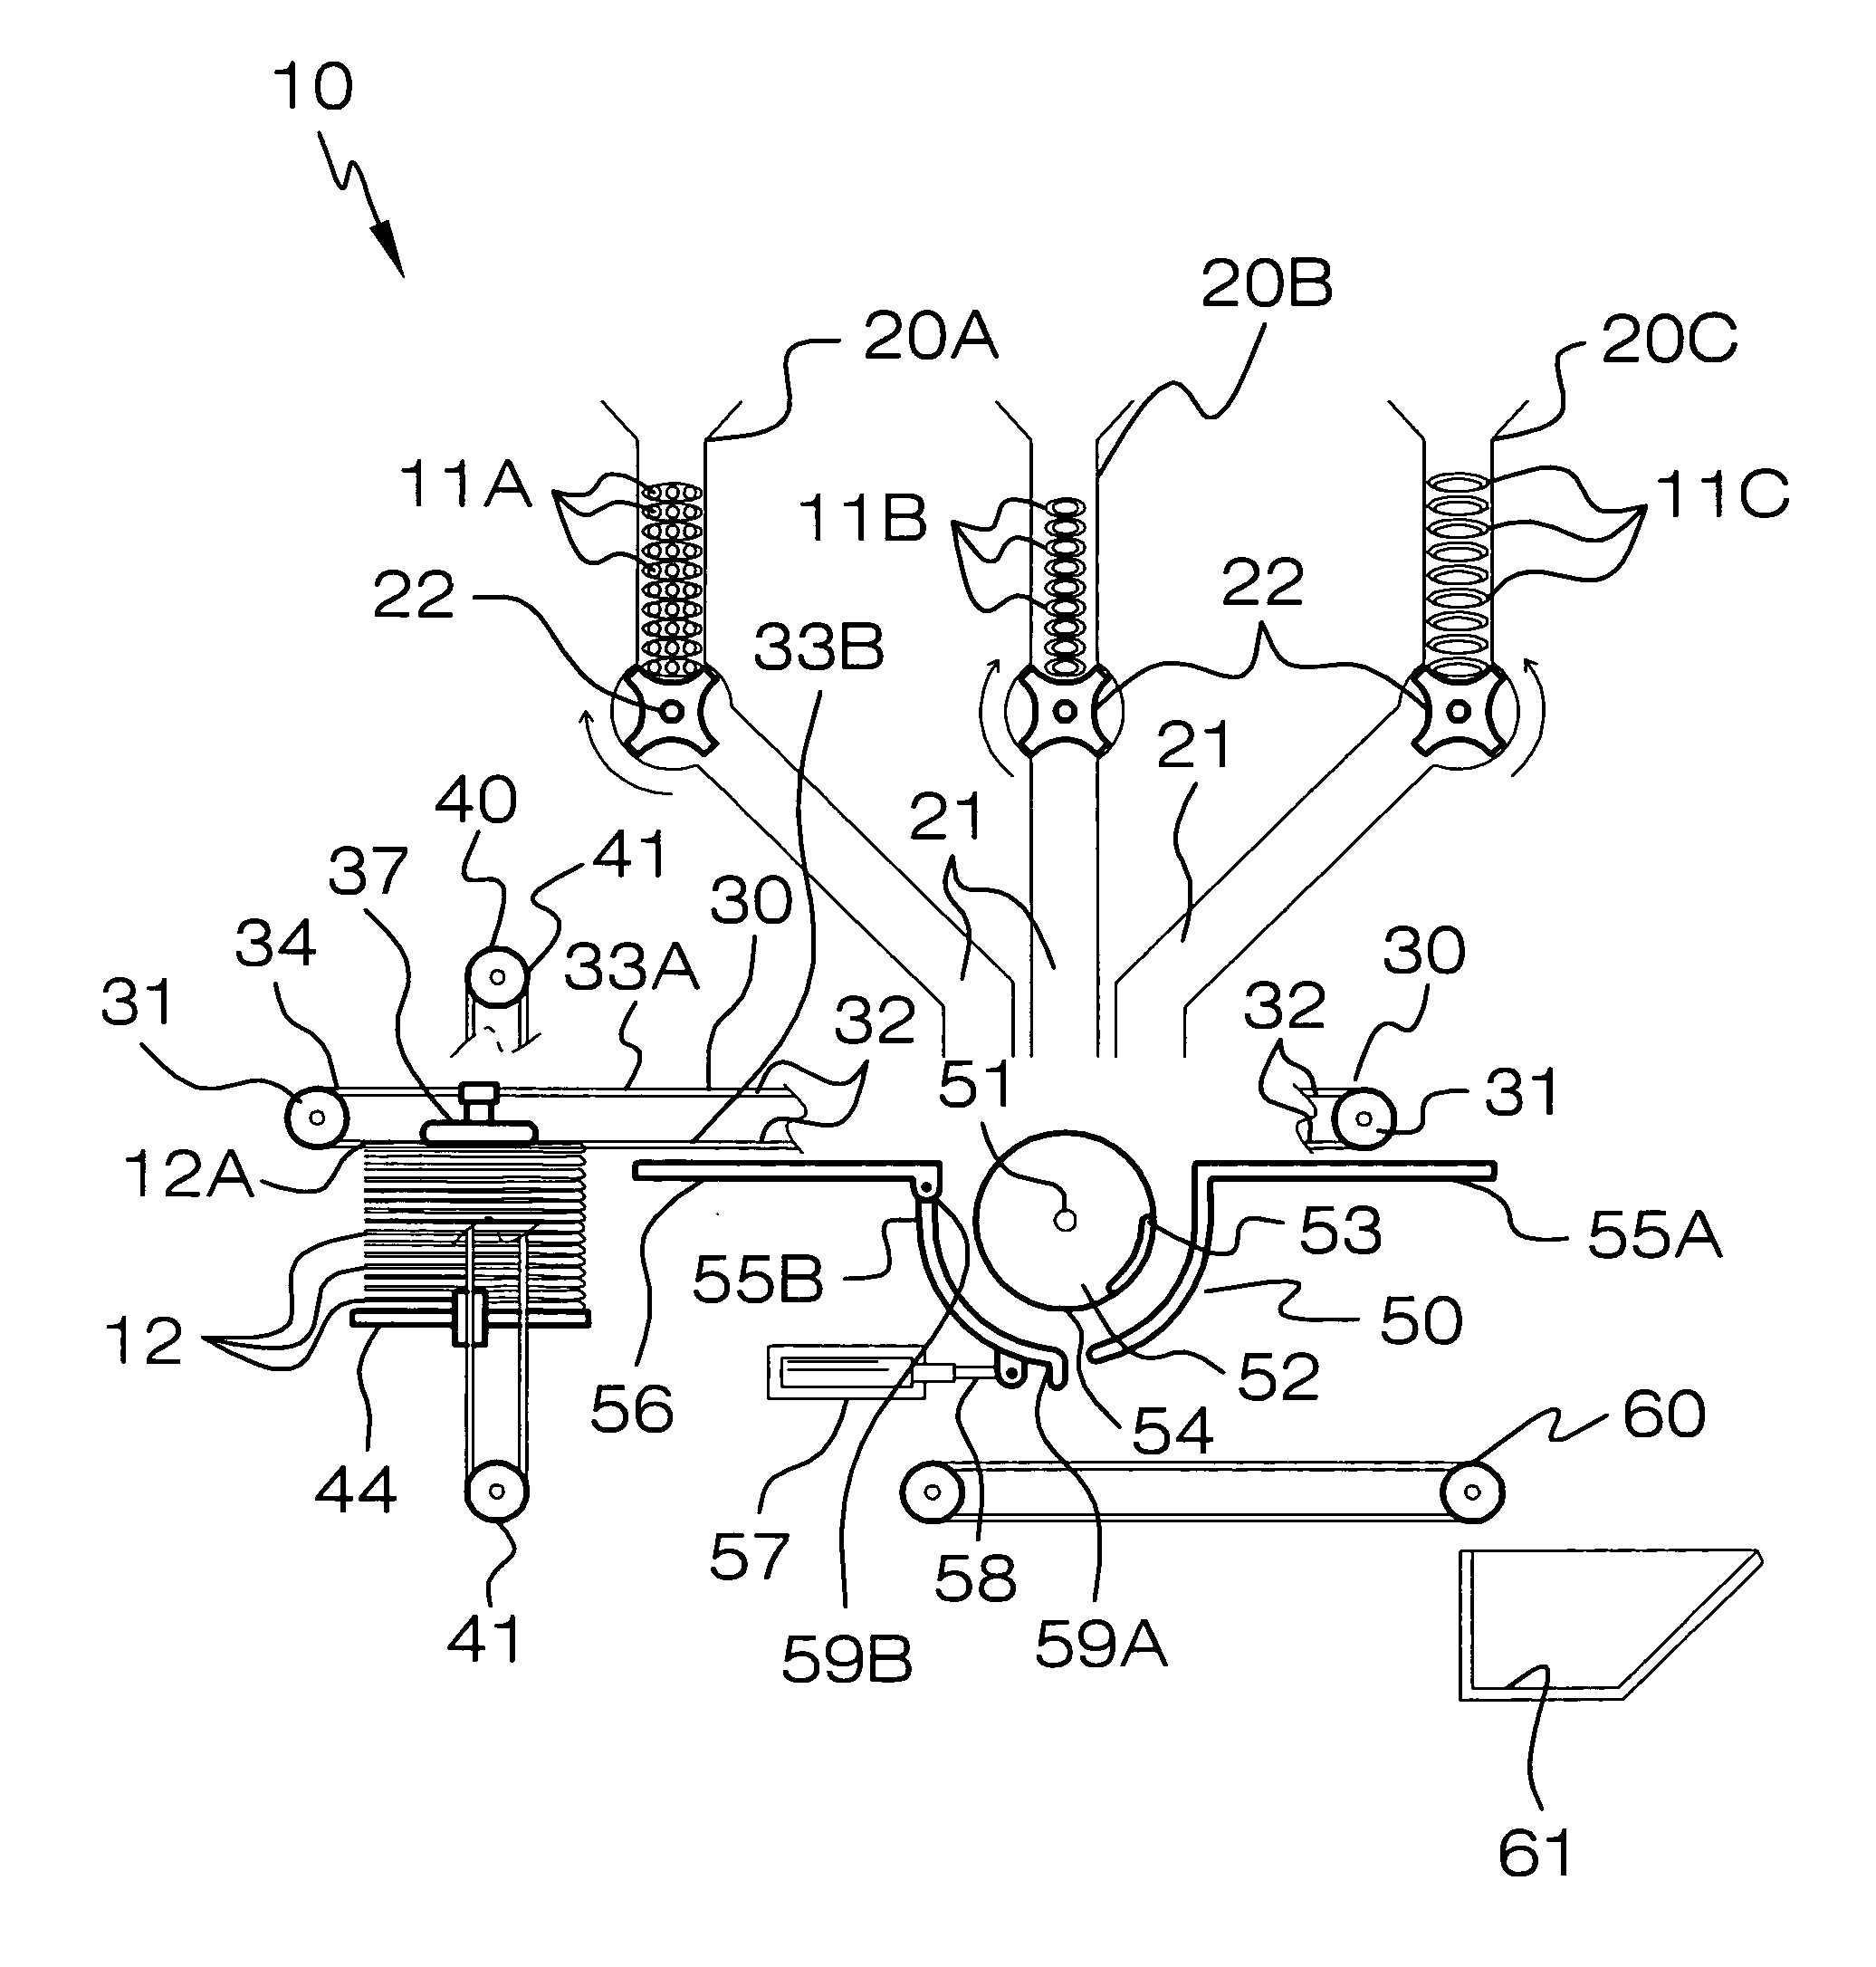 Device for wrapping a napkin about silverware and associated method